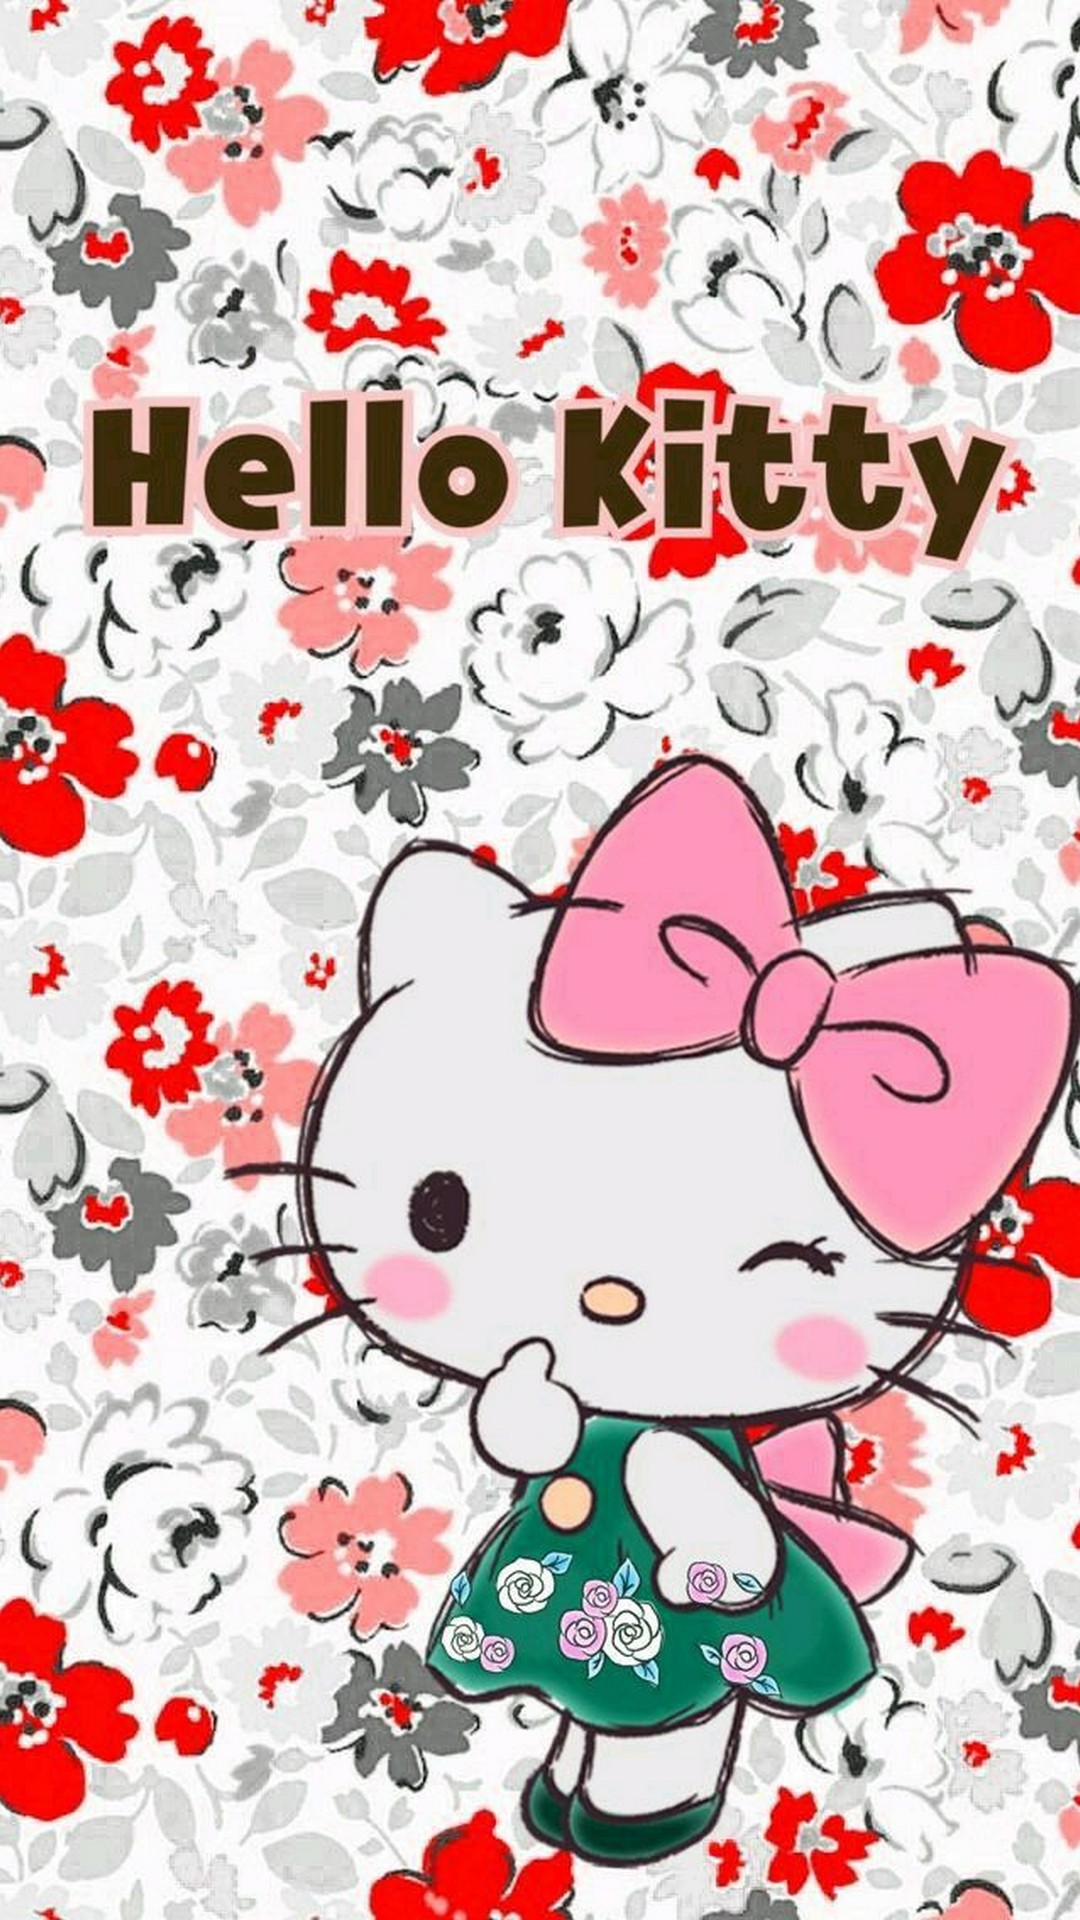 Hello Kitty Characters Wallpaper Android With Image - Gambar Hello Kitty Lucu - HD Wallpaper 